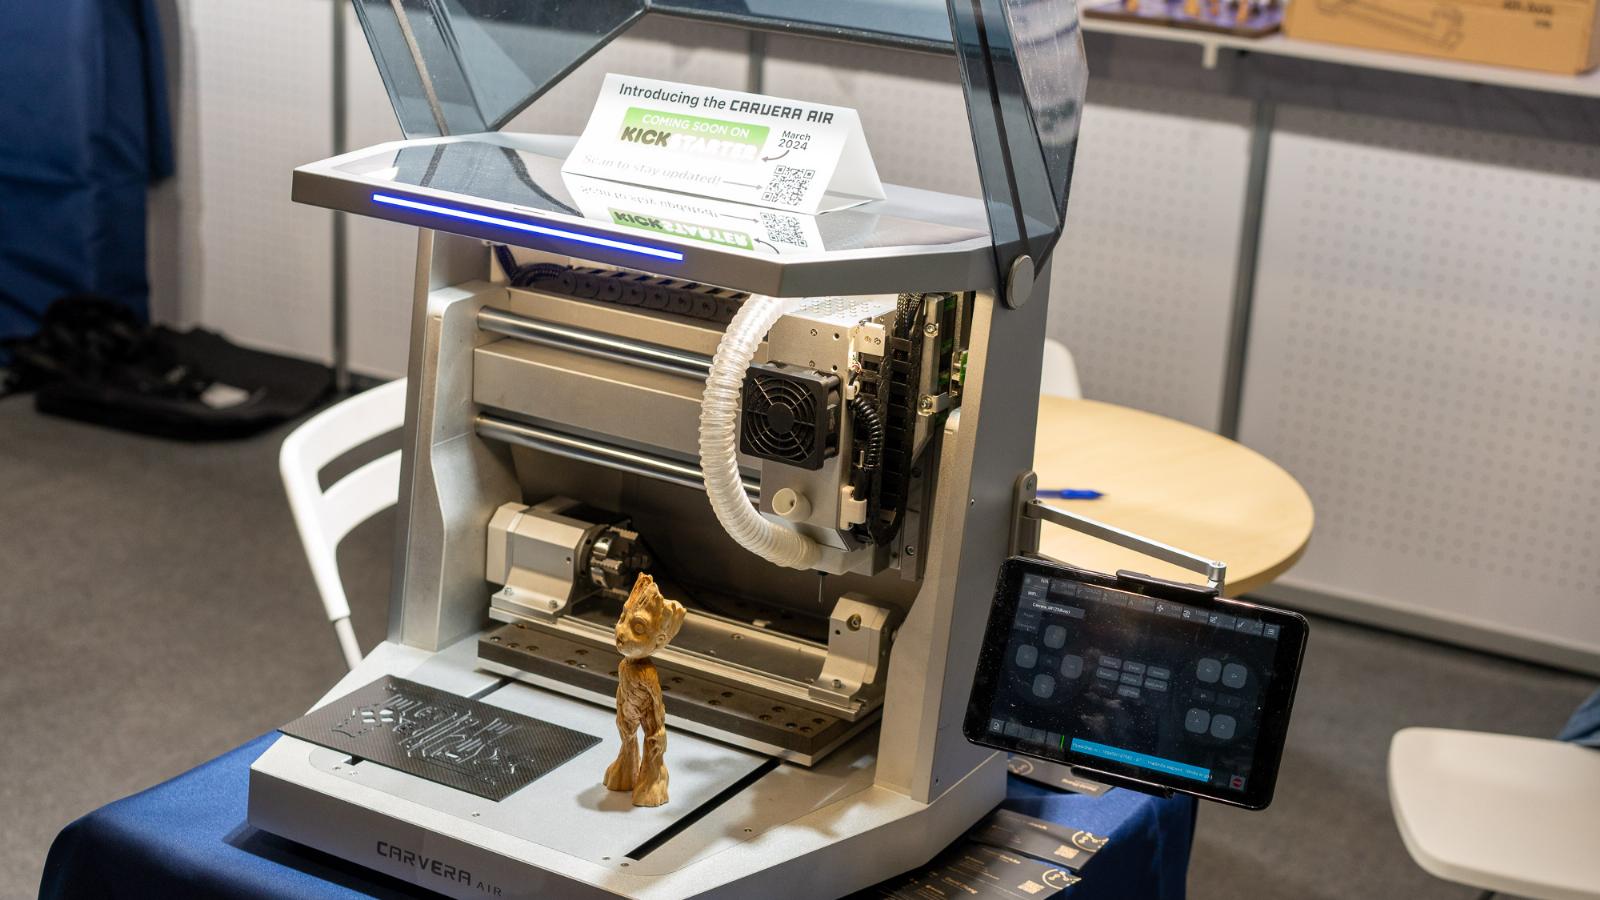 Makera is releasing a baby sibling of its Carvera desktop 4-axis mill